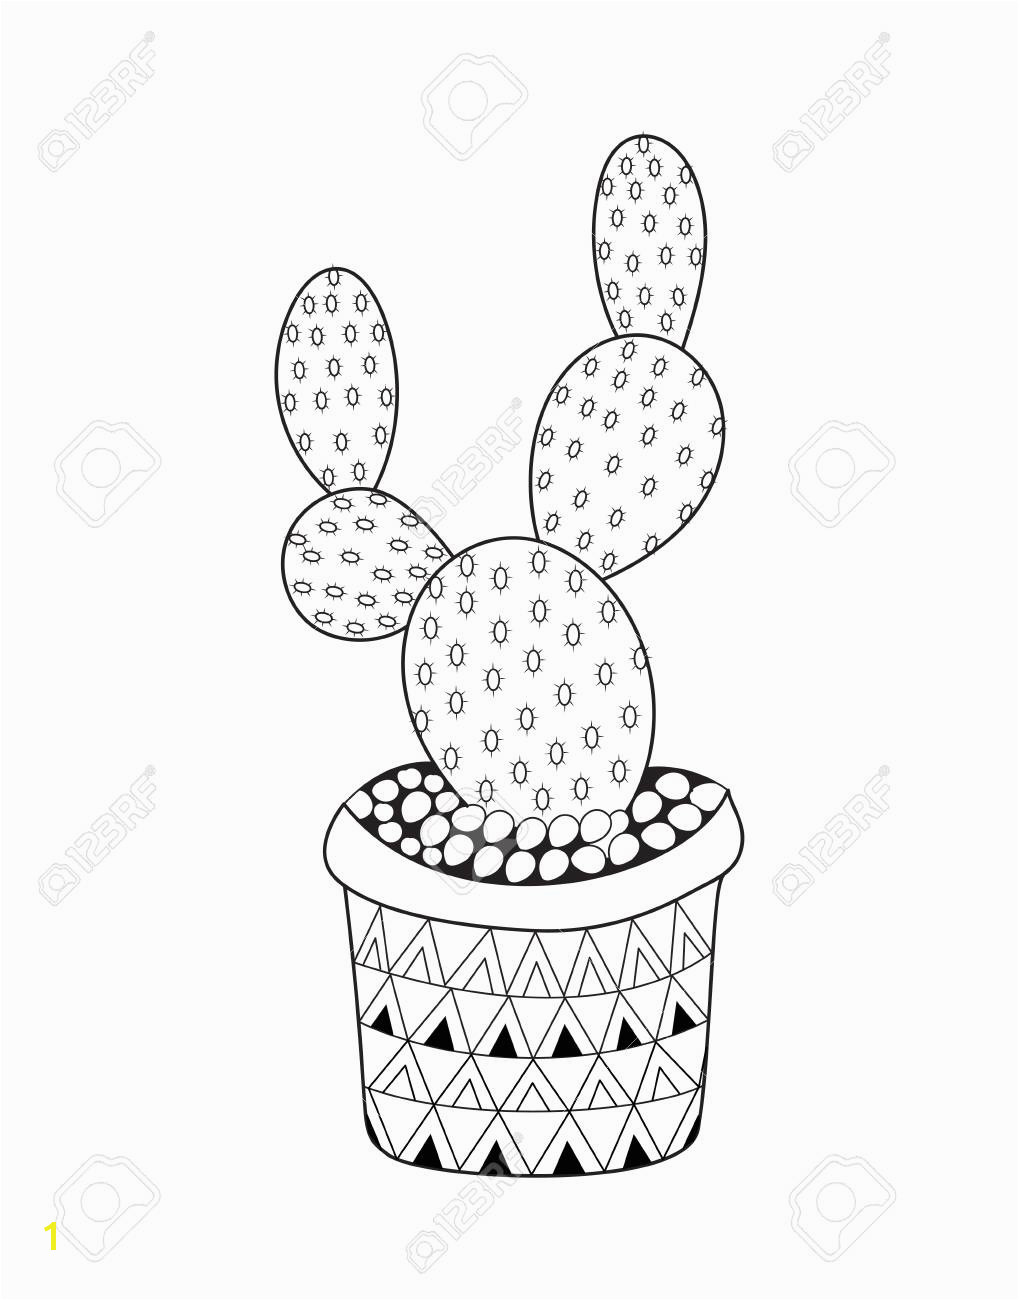 Cactus Opuntia microdasys cactus for adult coloring page vector illustration Stock Vector